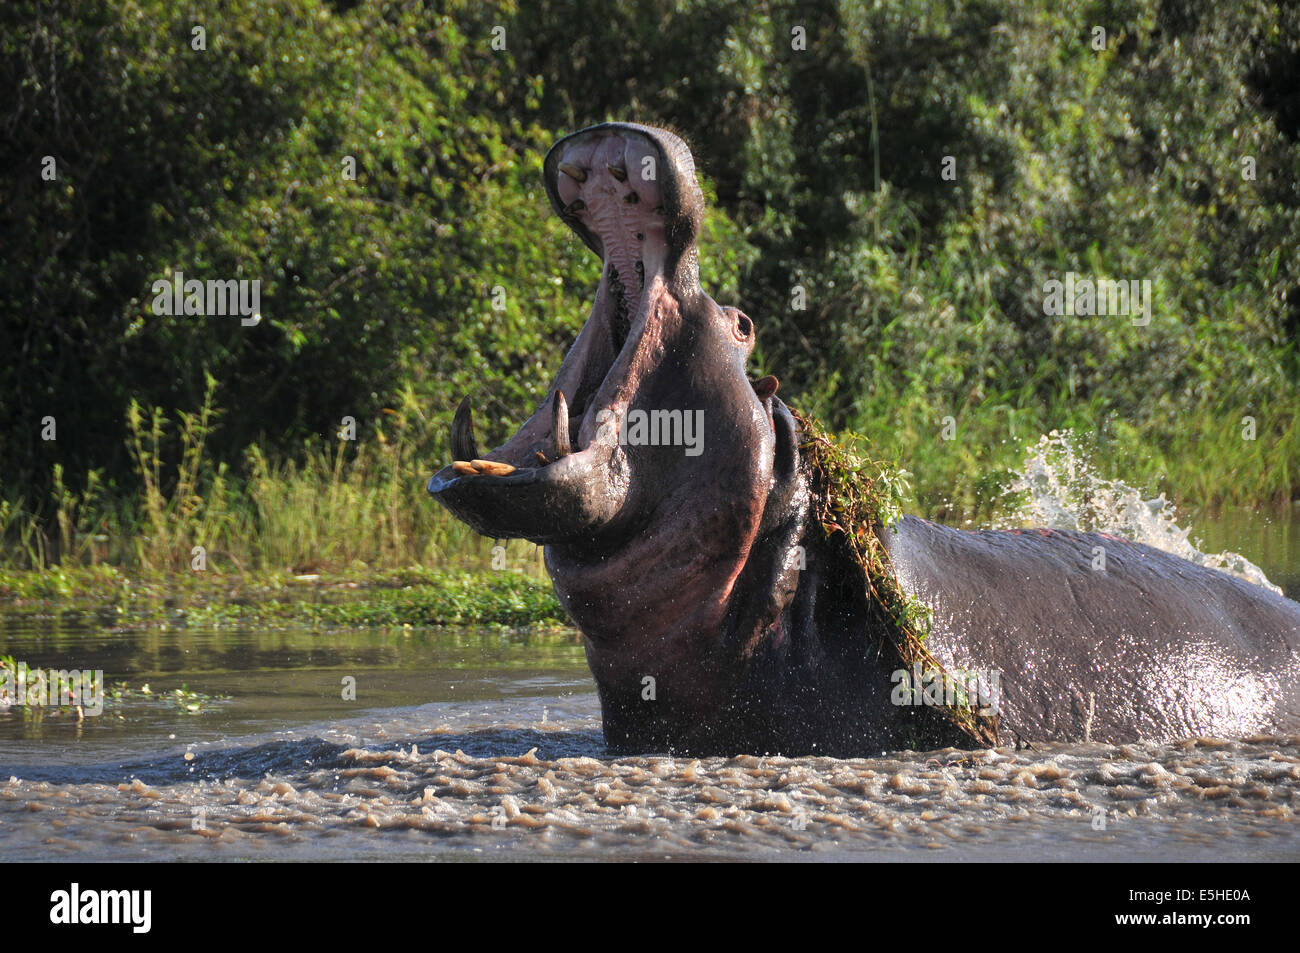 big mouth hippo shows his teeth Stock Photo